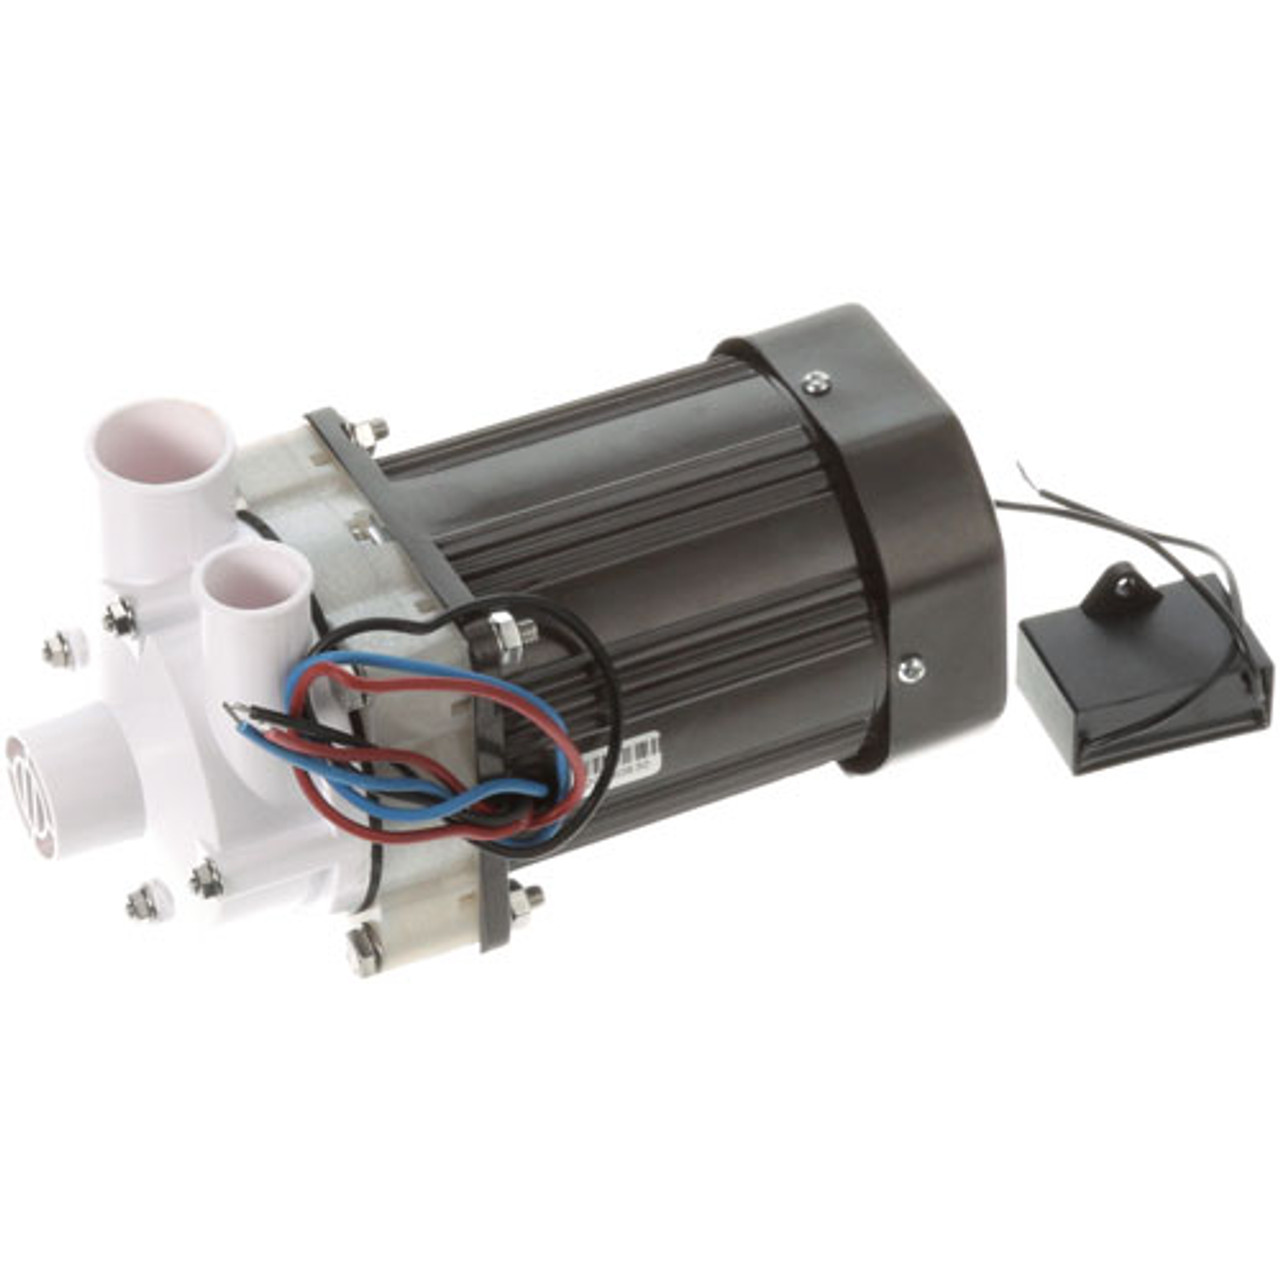 Pump Motor Assembly - Replacement Part For Hoshizaki S0730